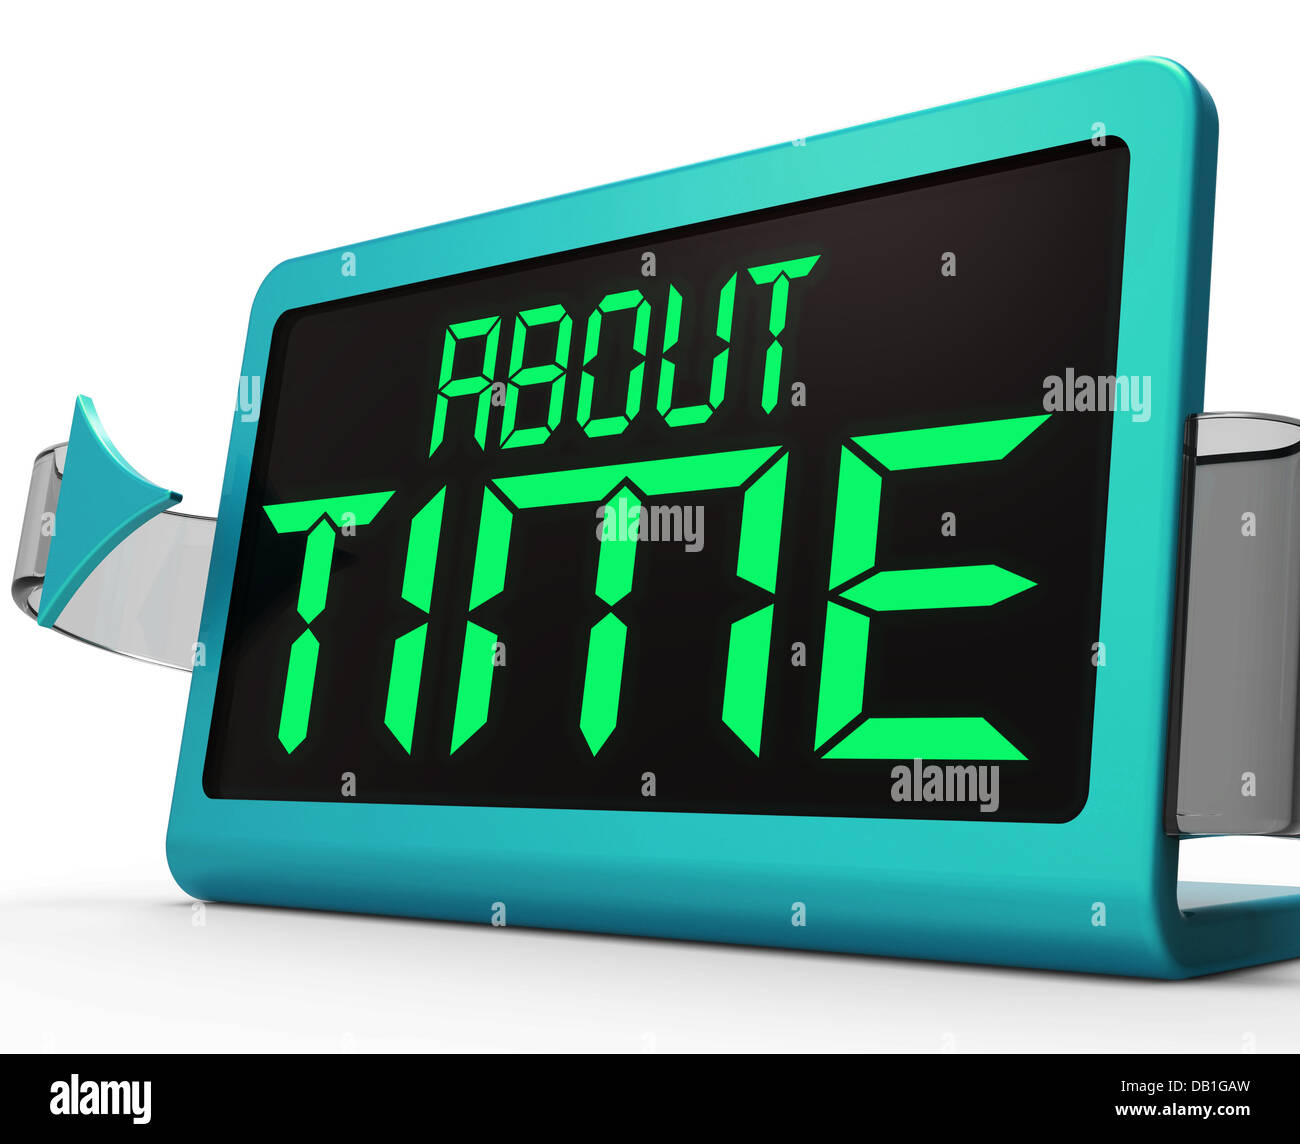 About Time Clock Shows Late And Tardiness Stock Photo